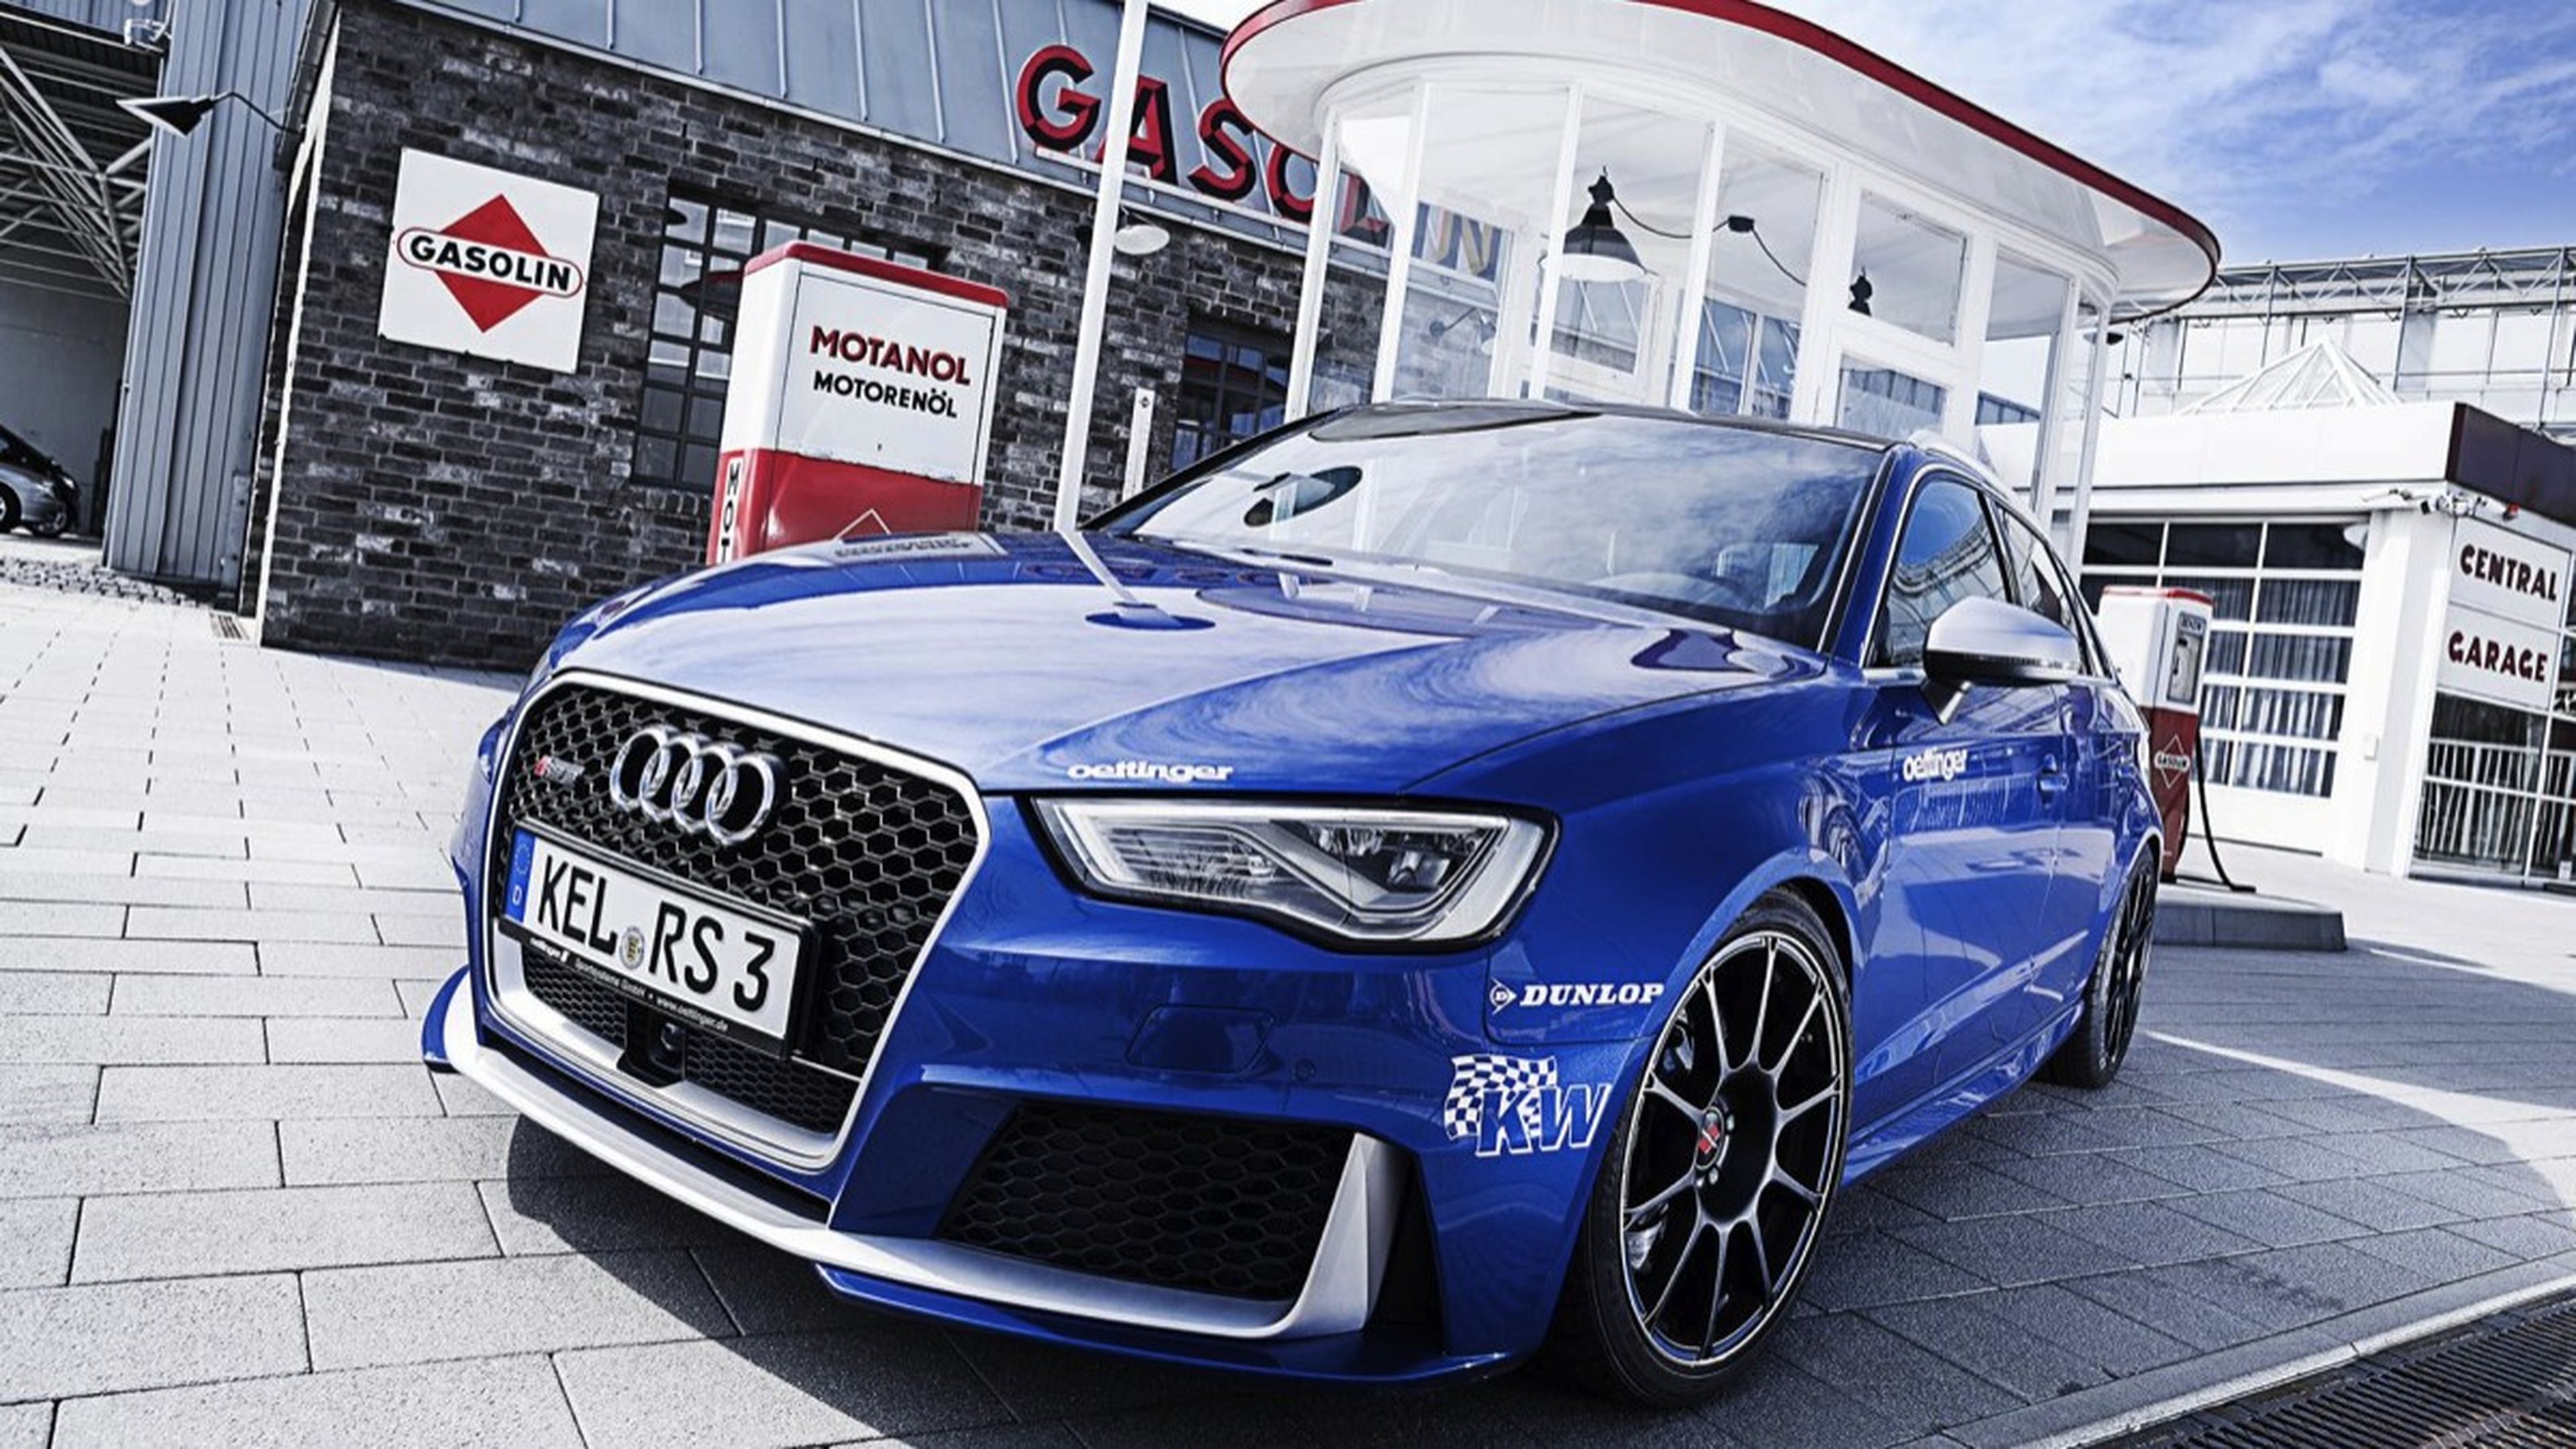 Audi RS3 Oettinger frontal